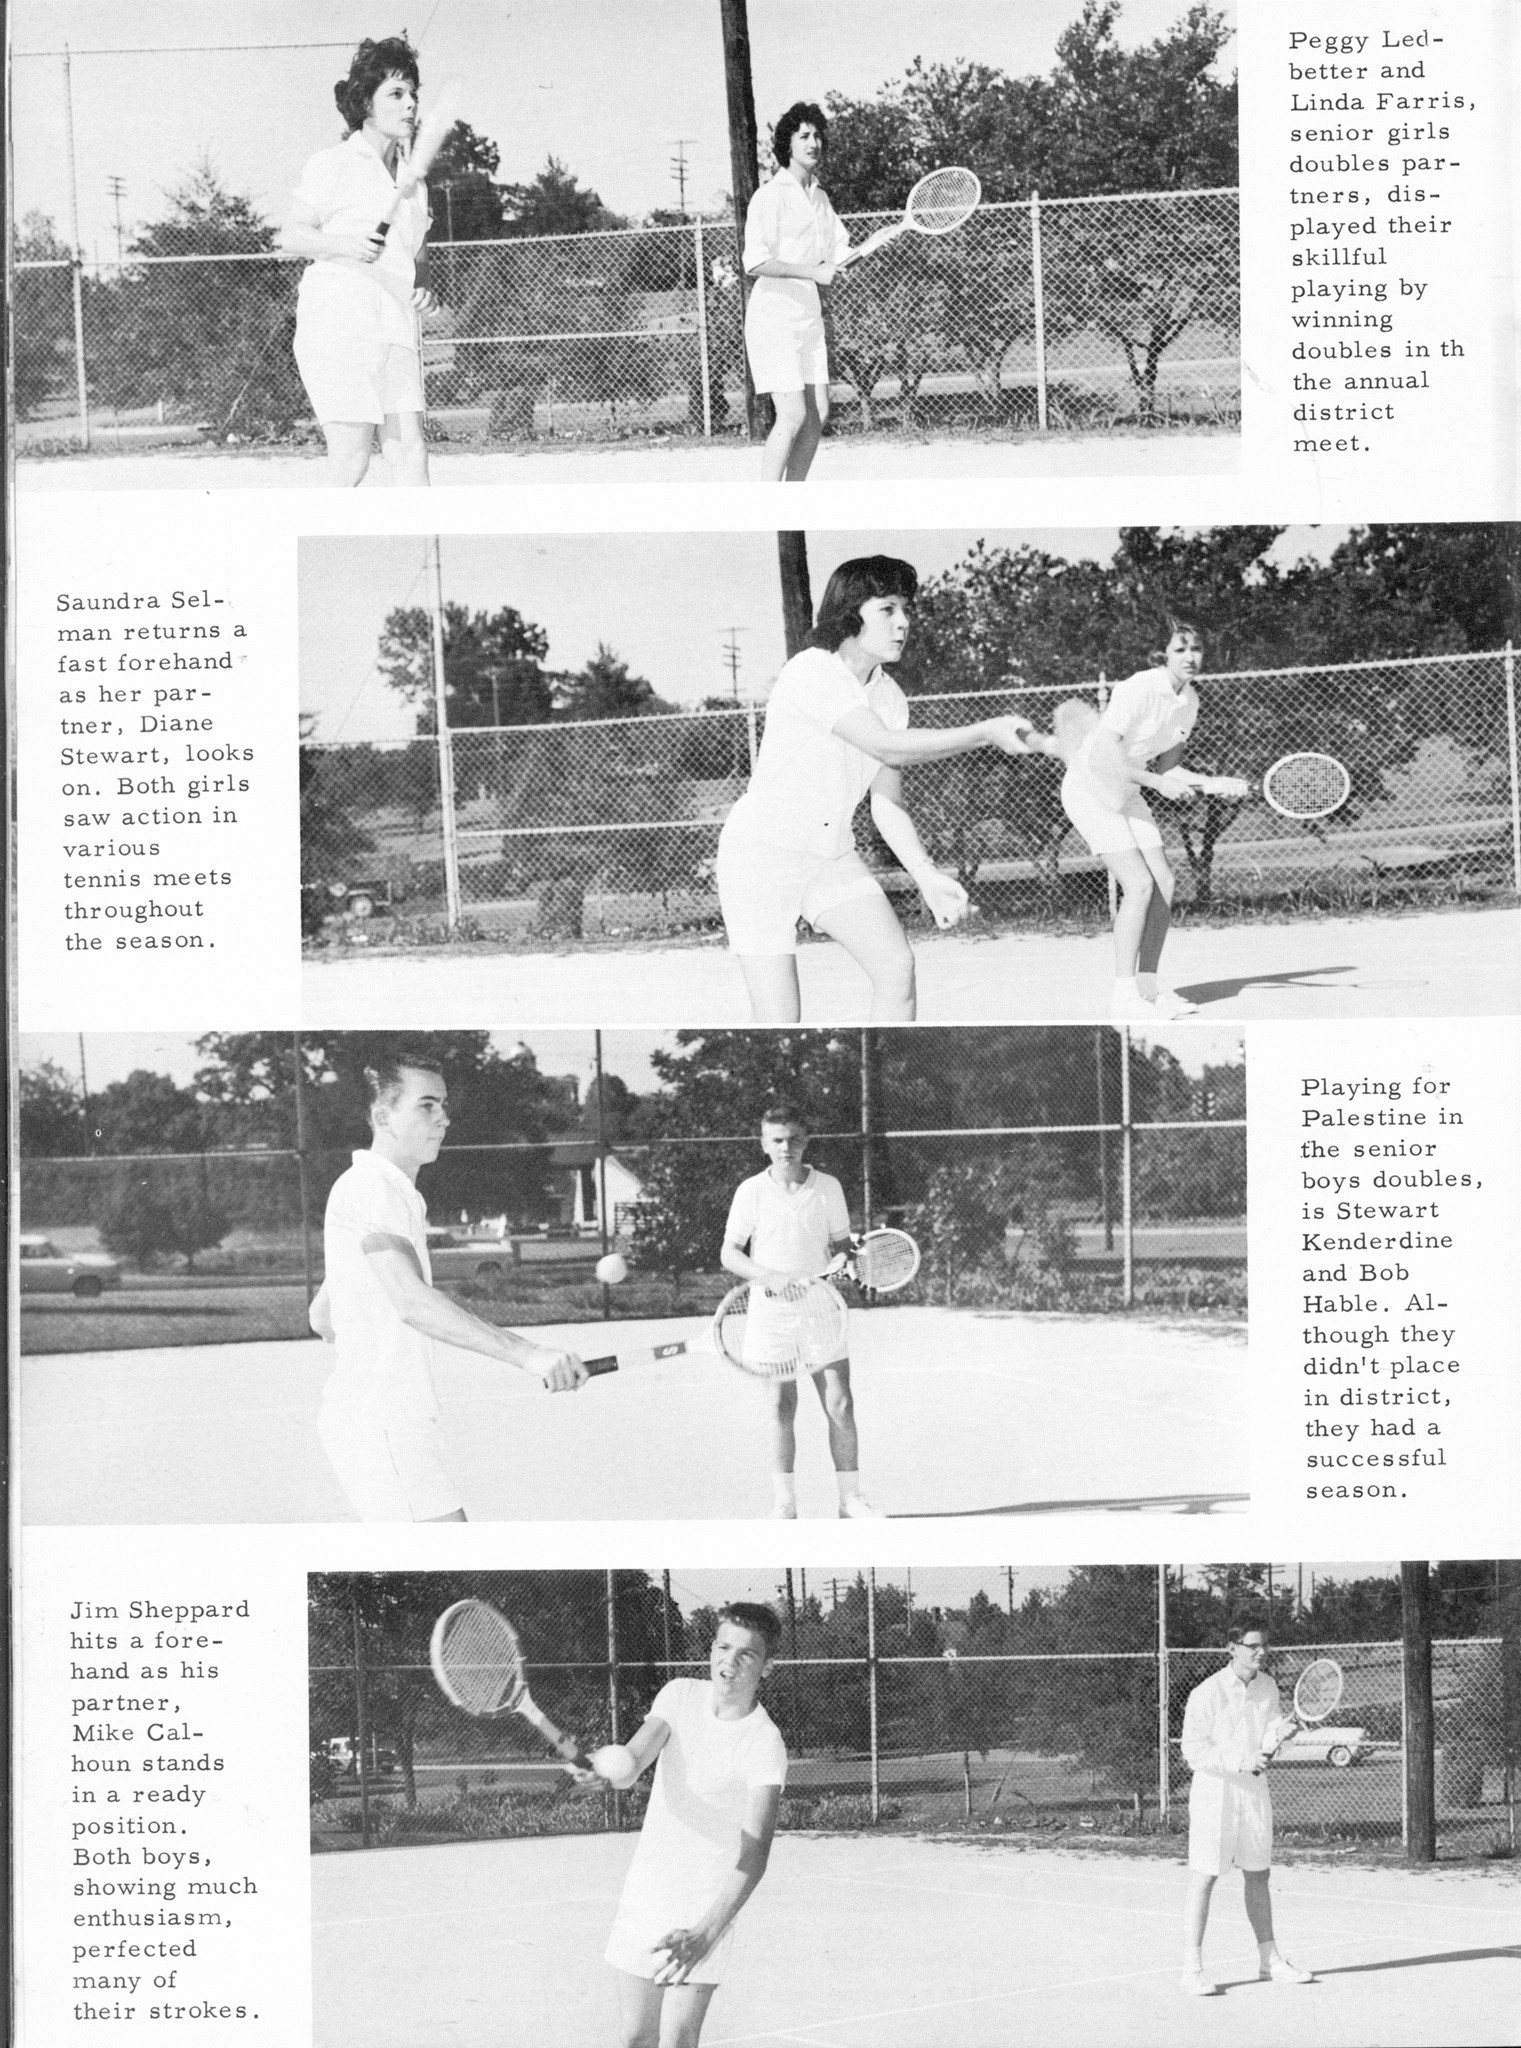 ../../../Images/Large/1959/Arclight-1959-pg0148.jpg